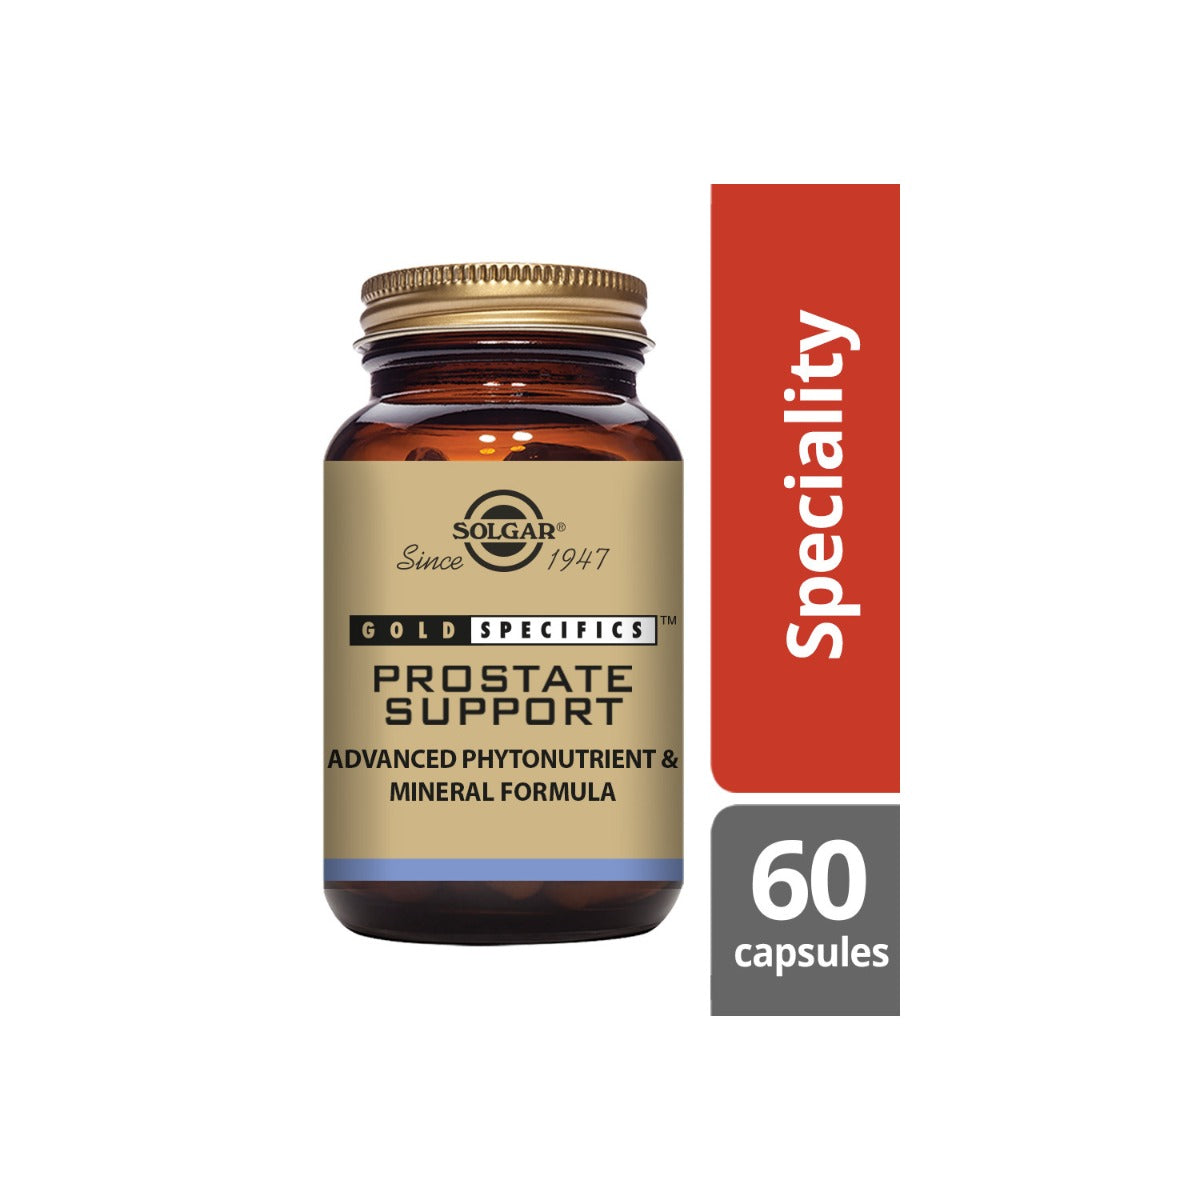 Solgar® Gold Specifics Prostate Support Vegetable Capsules - Pack of 60